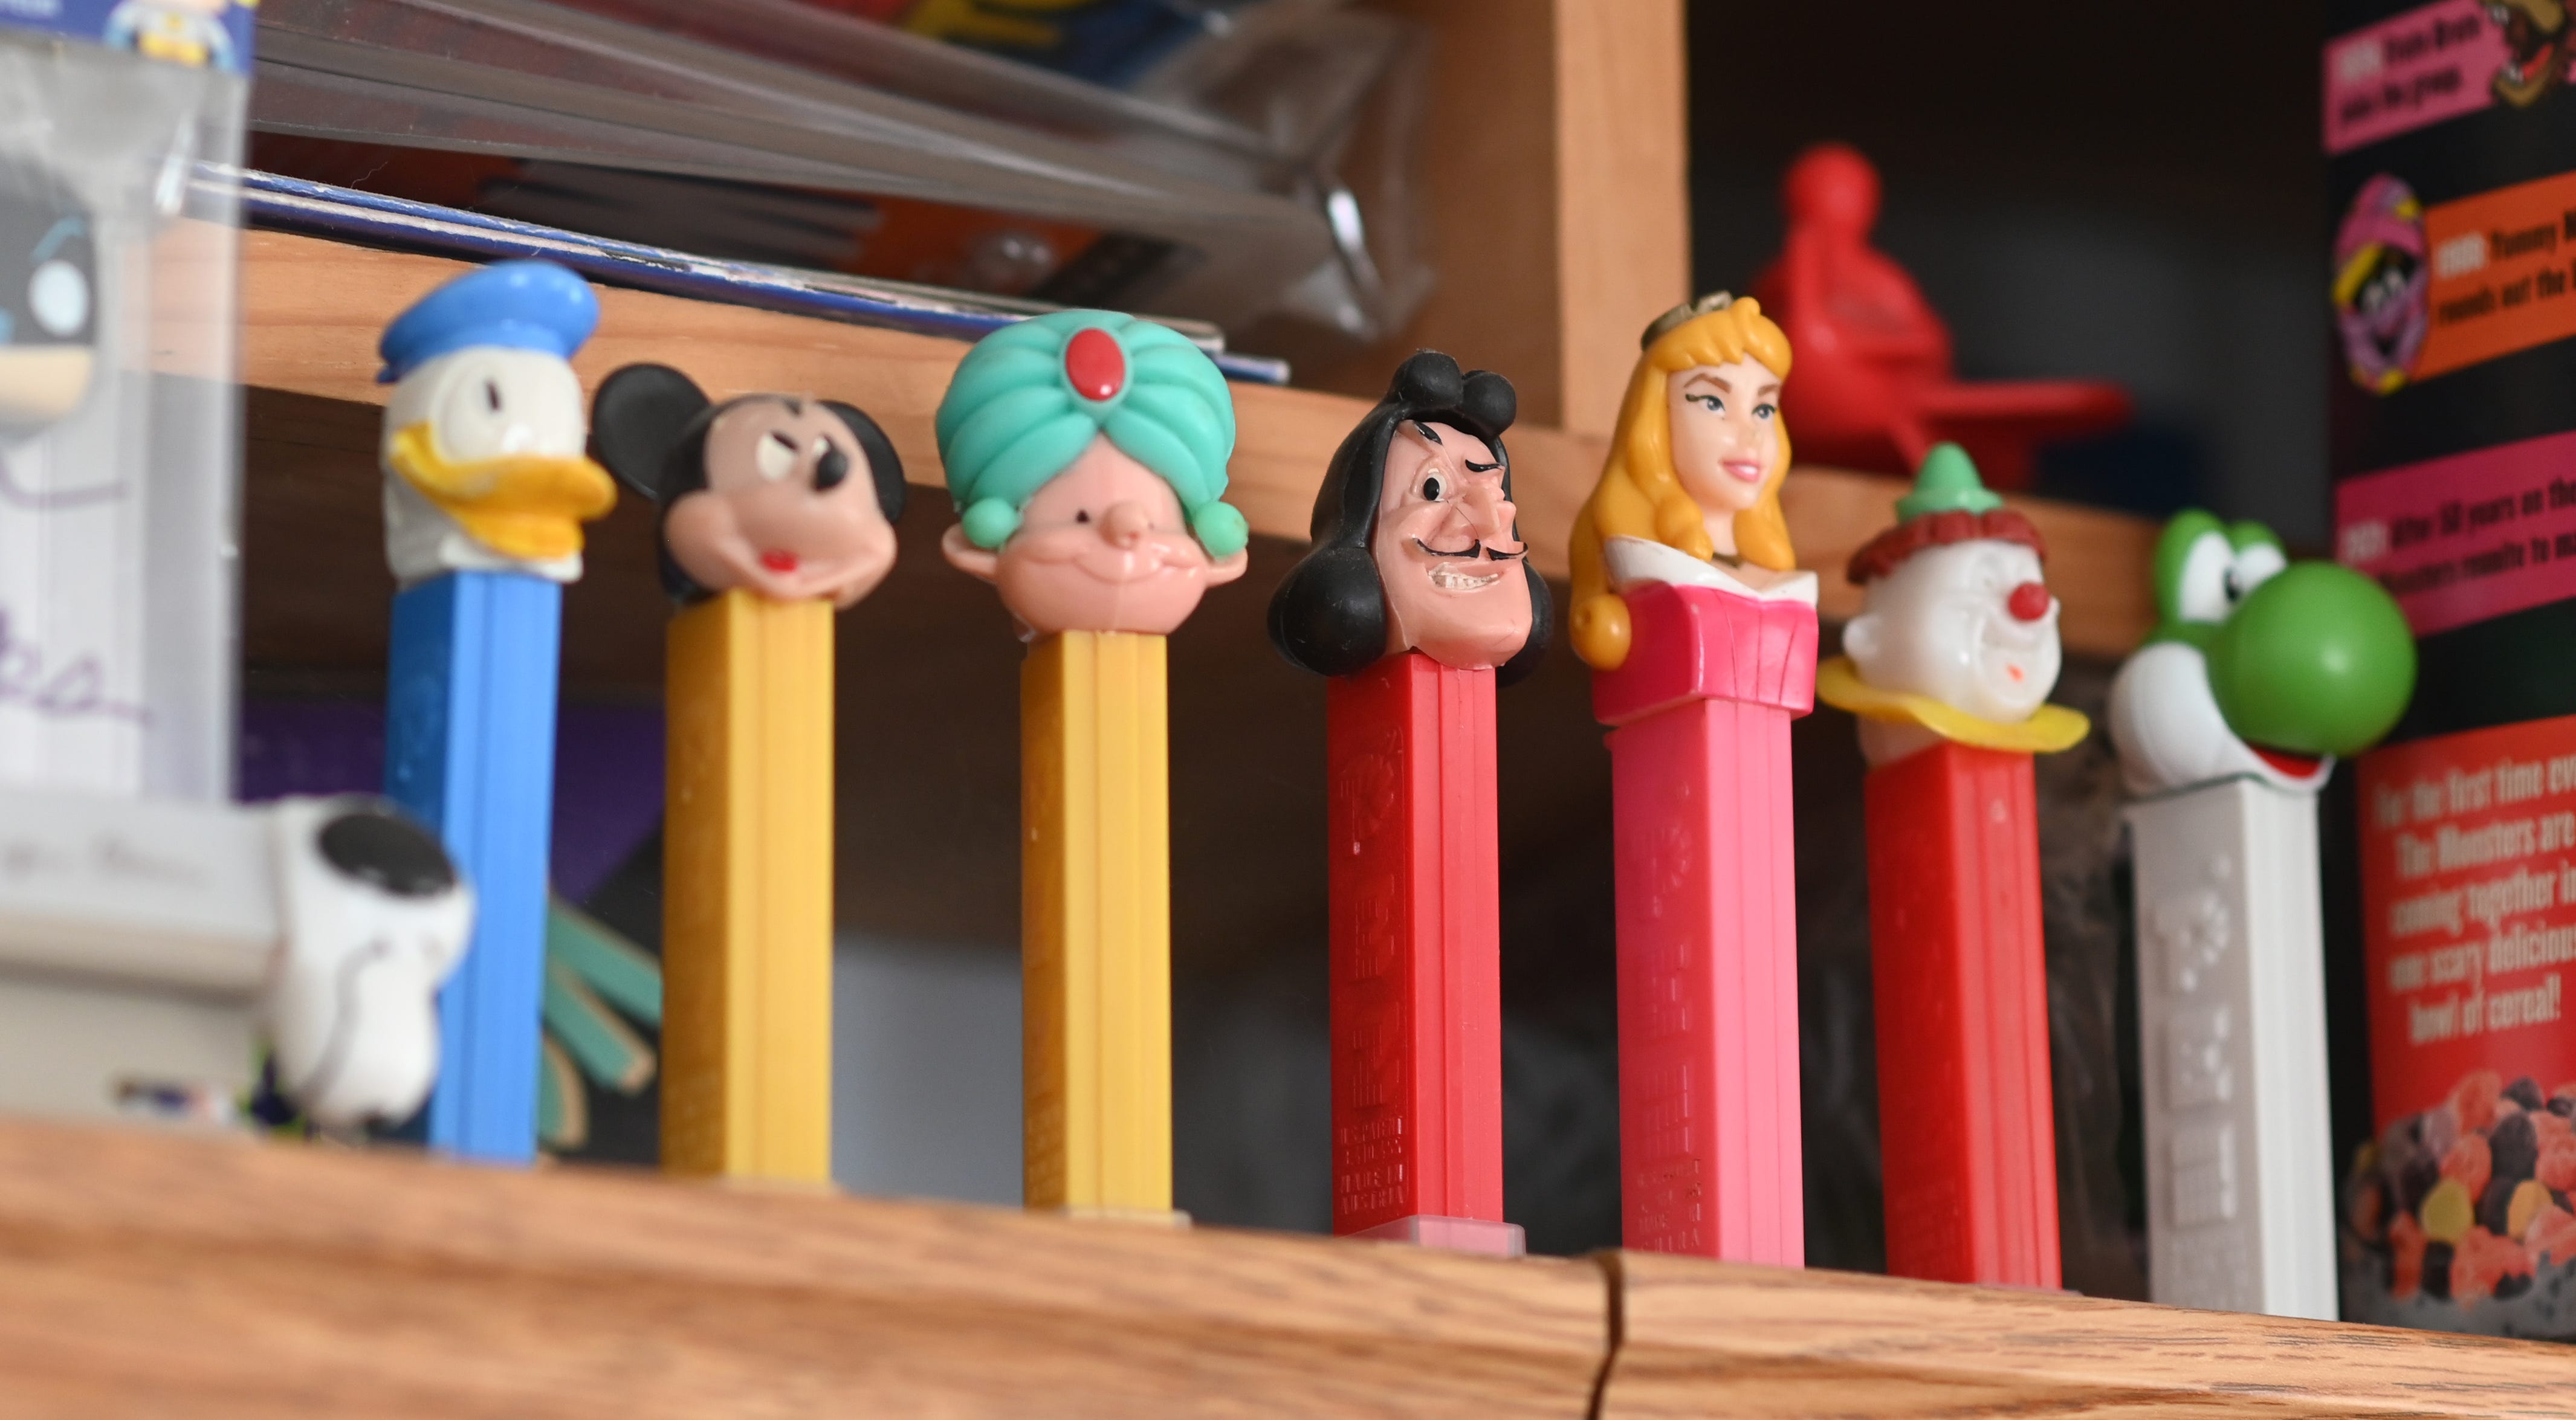 Steve Glew has a collection of classic Pez dispensers. Glew said in 1998 alone, he grossed $750,000 selling Pez.